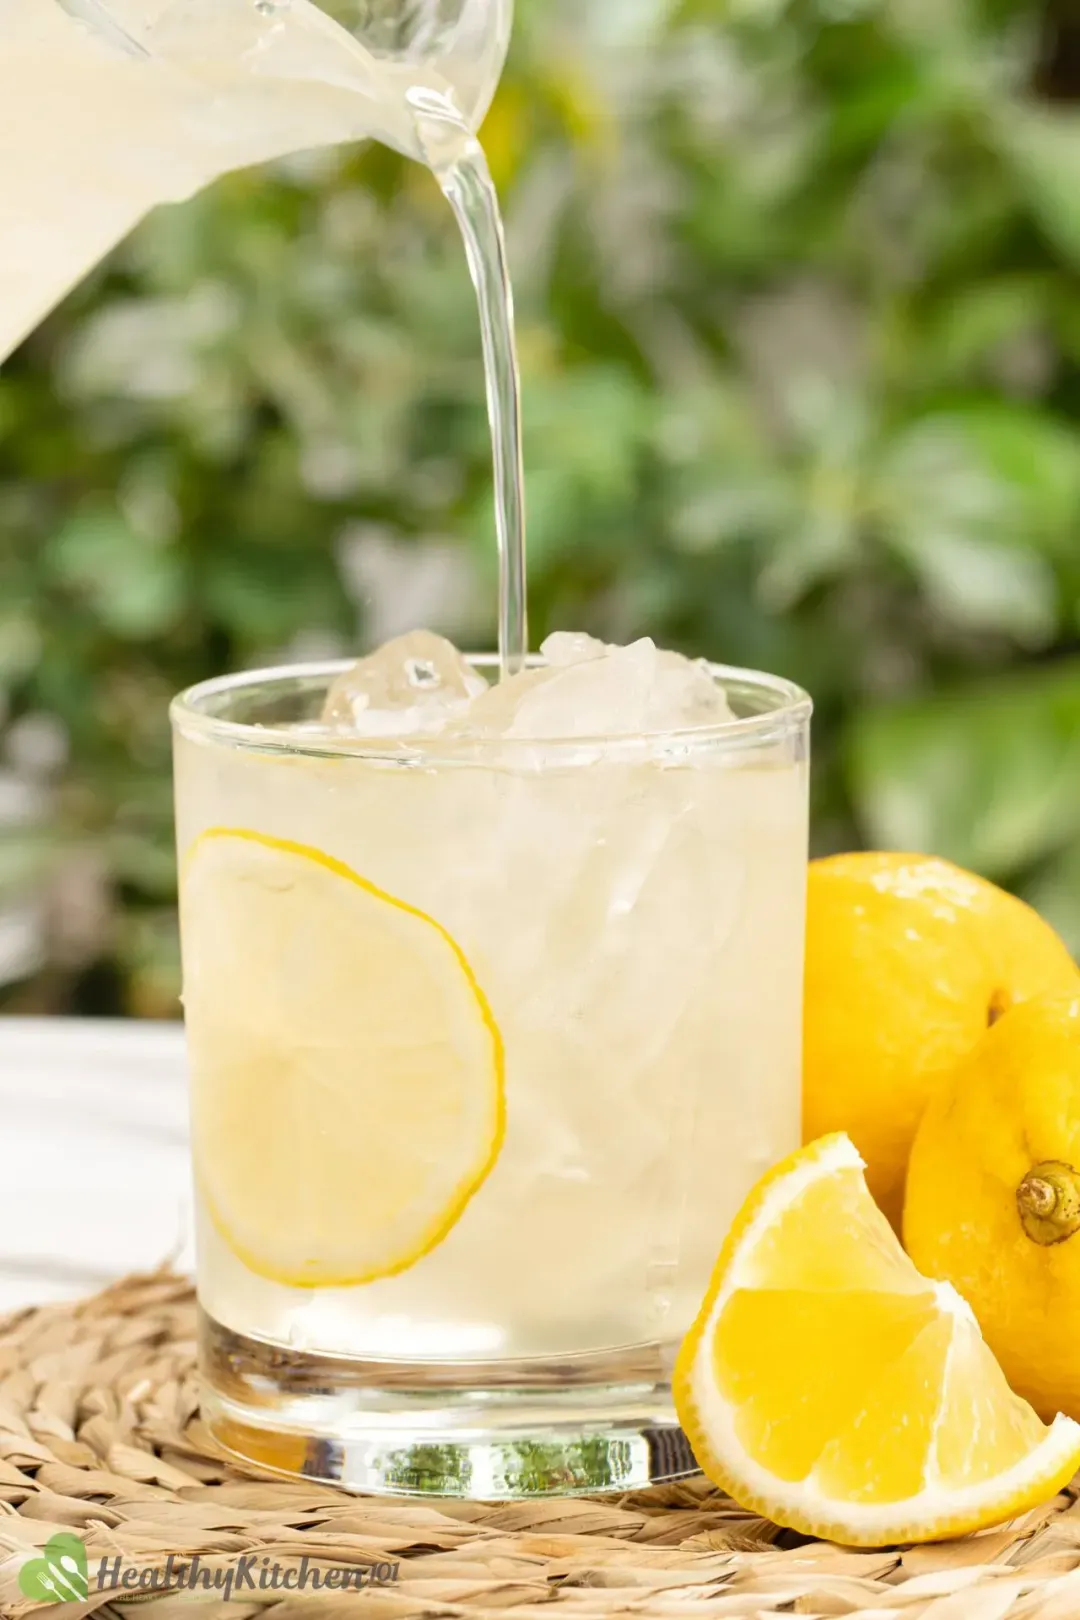 A glass of iced lemonade with lemons on the side, placed in front of green bushes